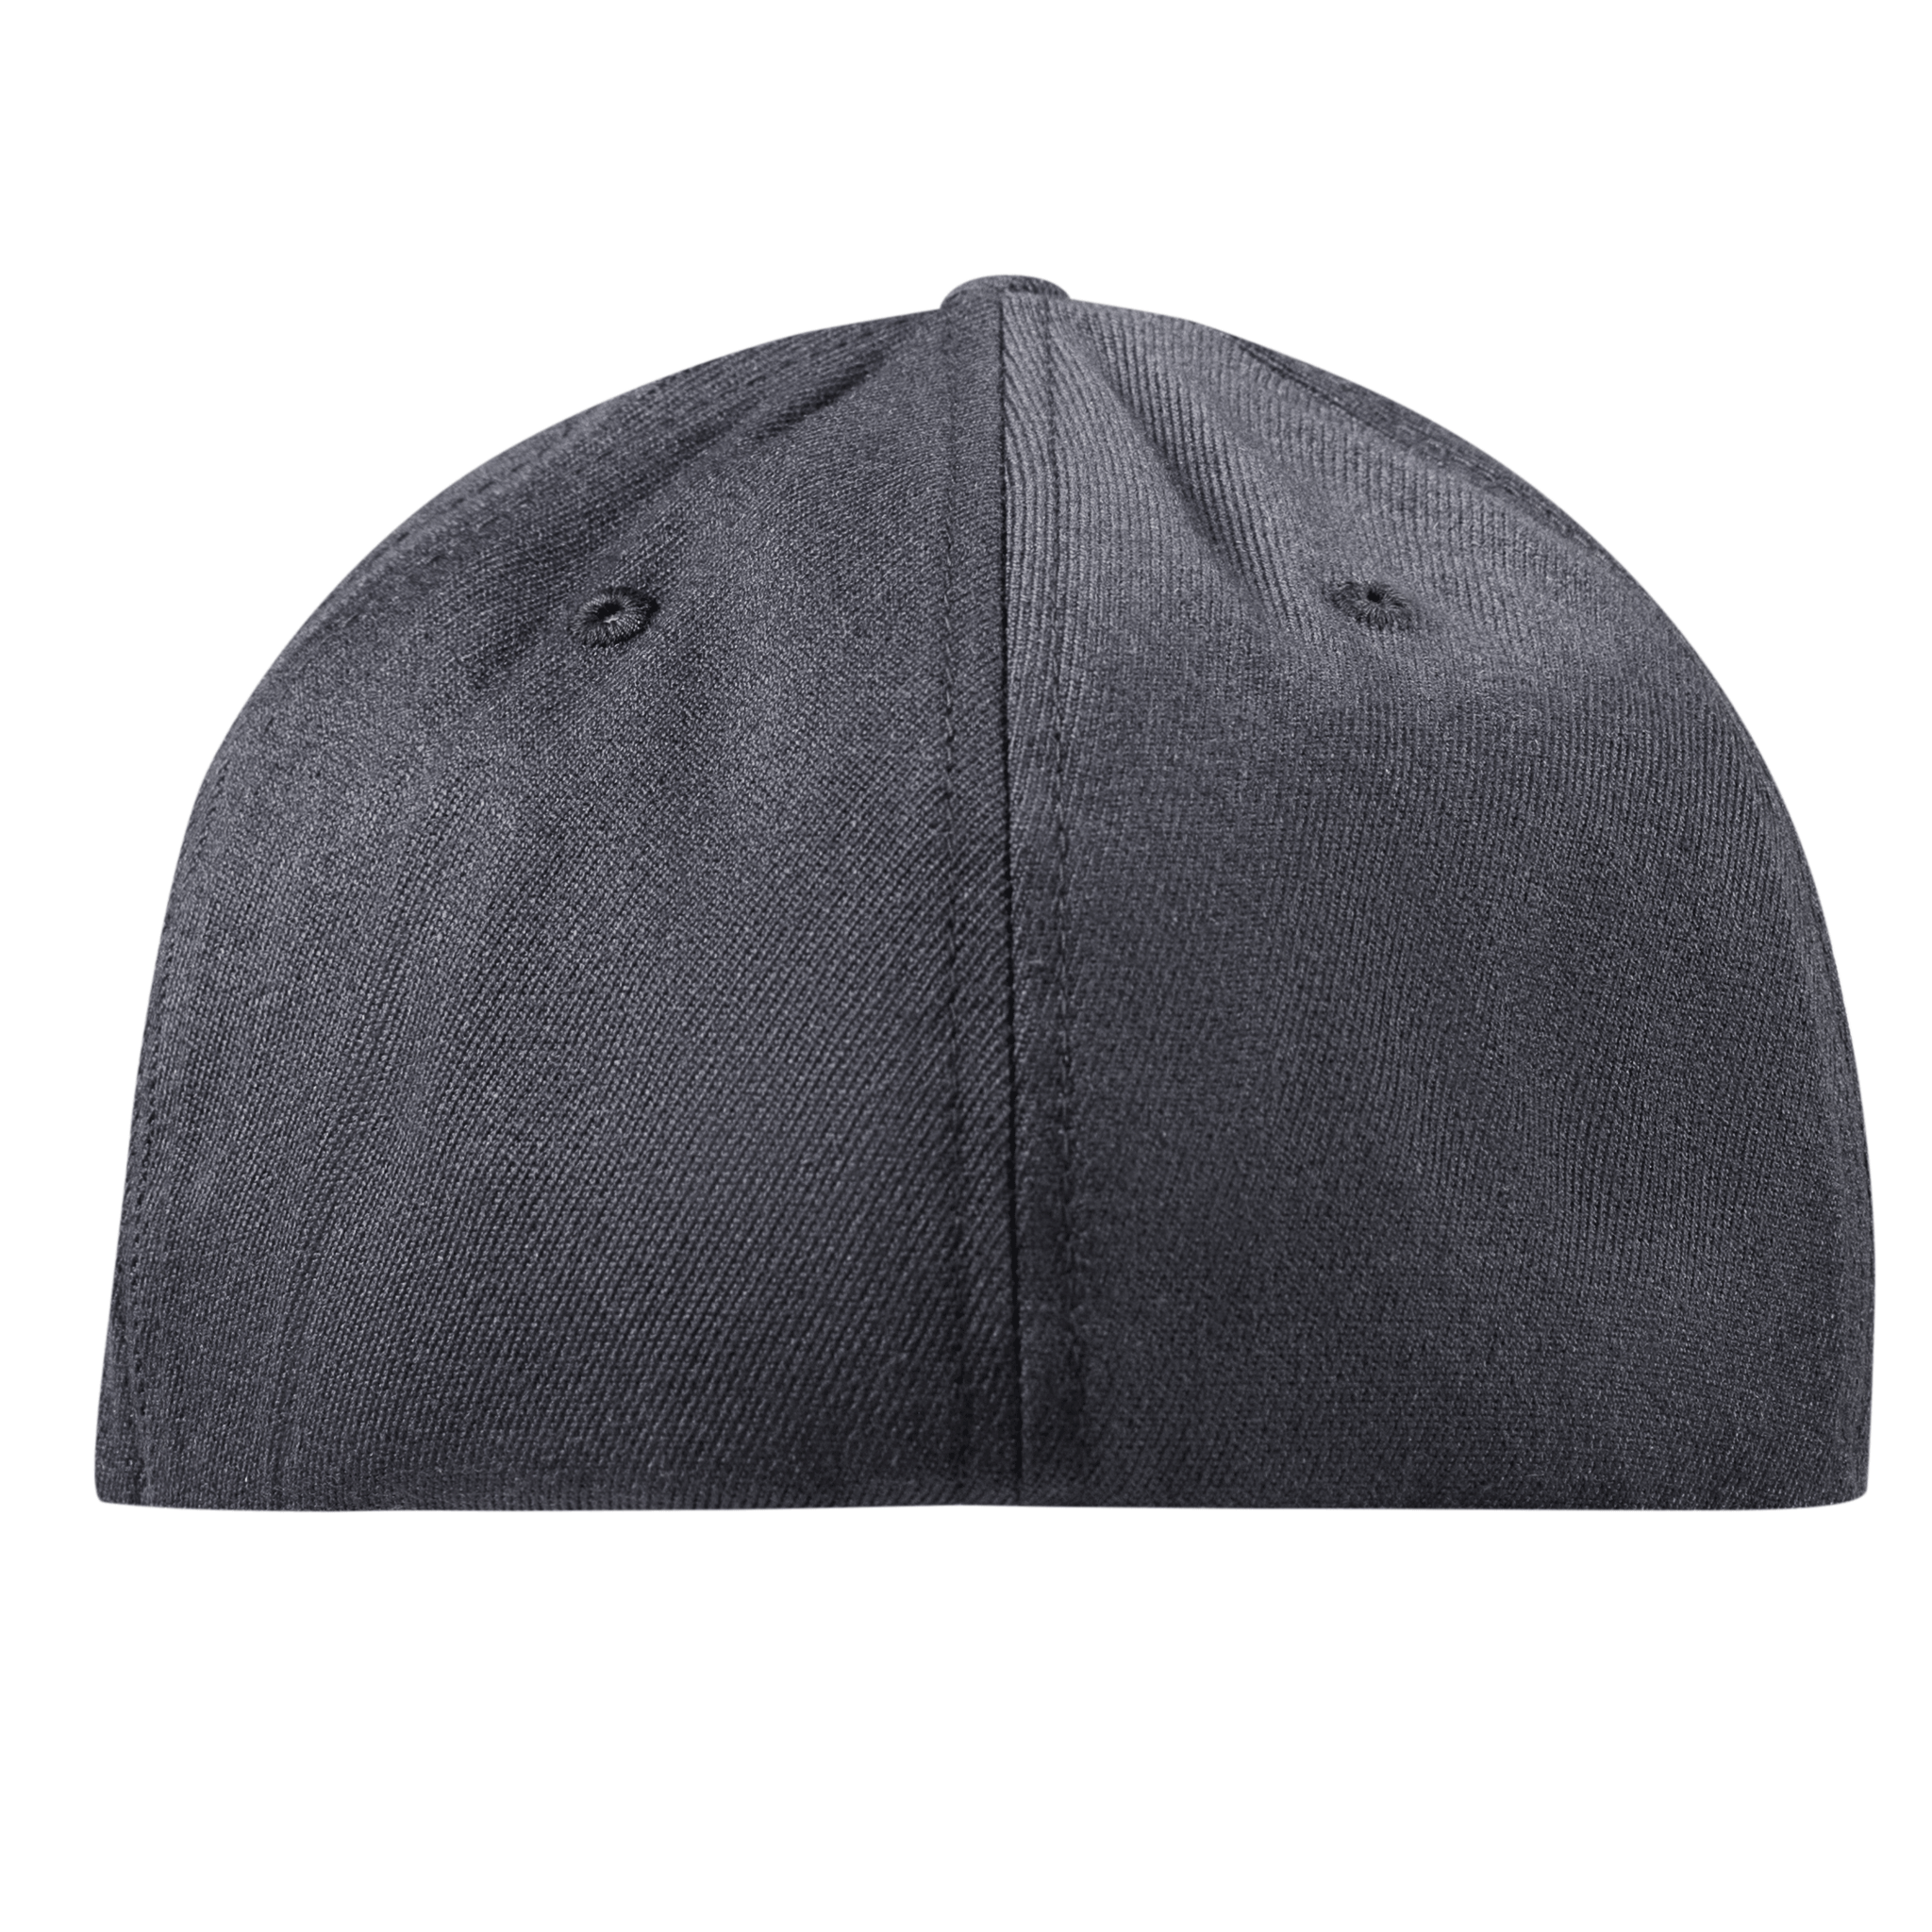 Wisconsin Camo Flexfit Fitted Back Charcoal